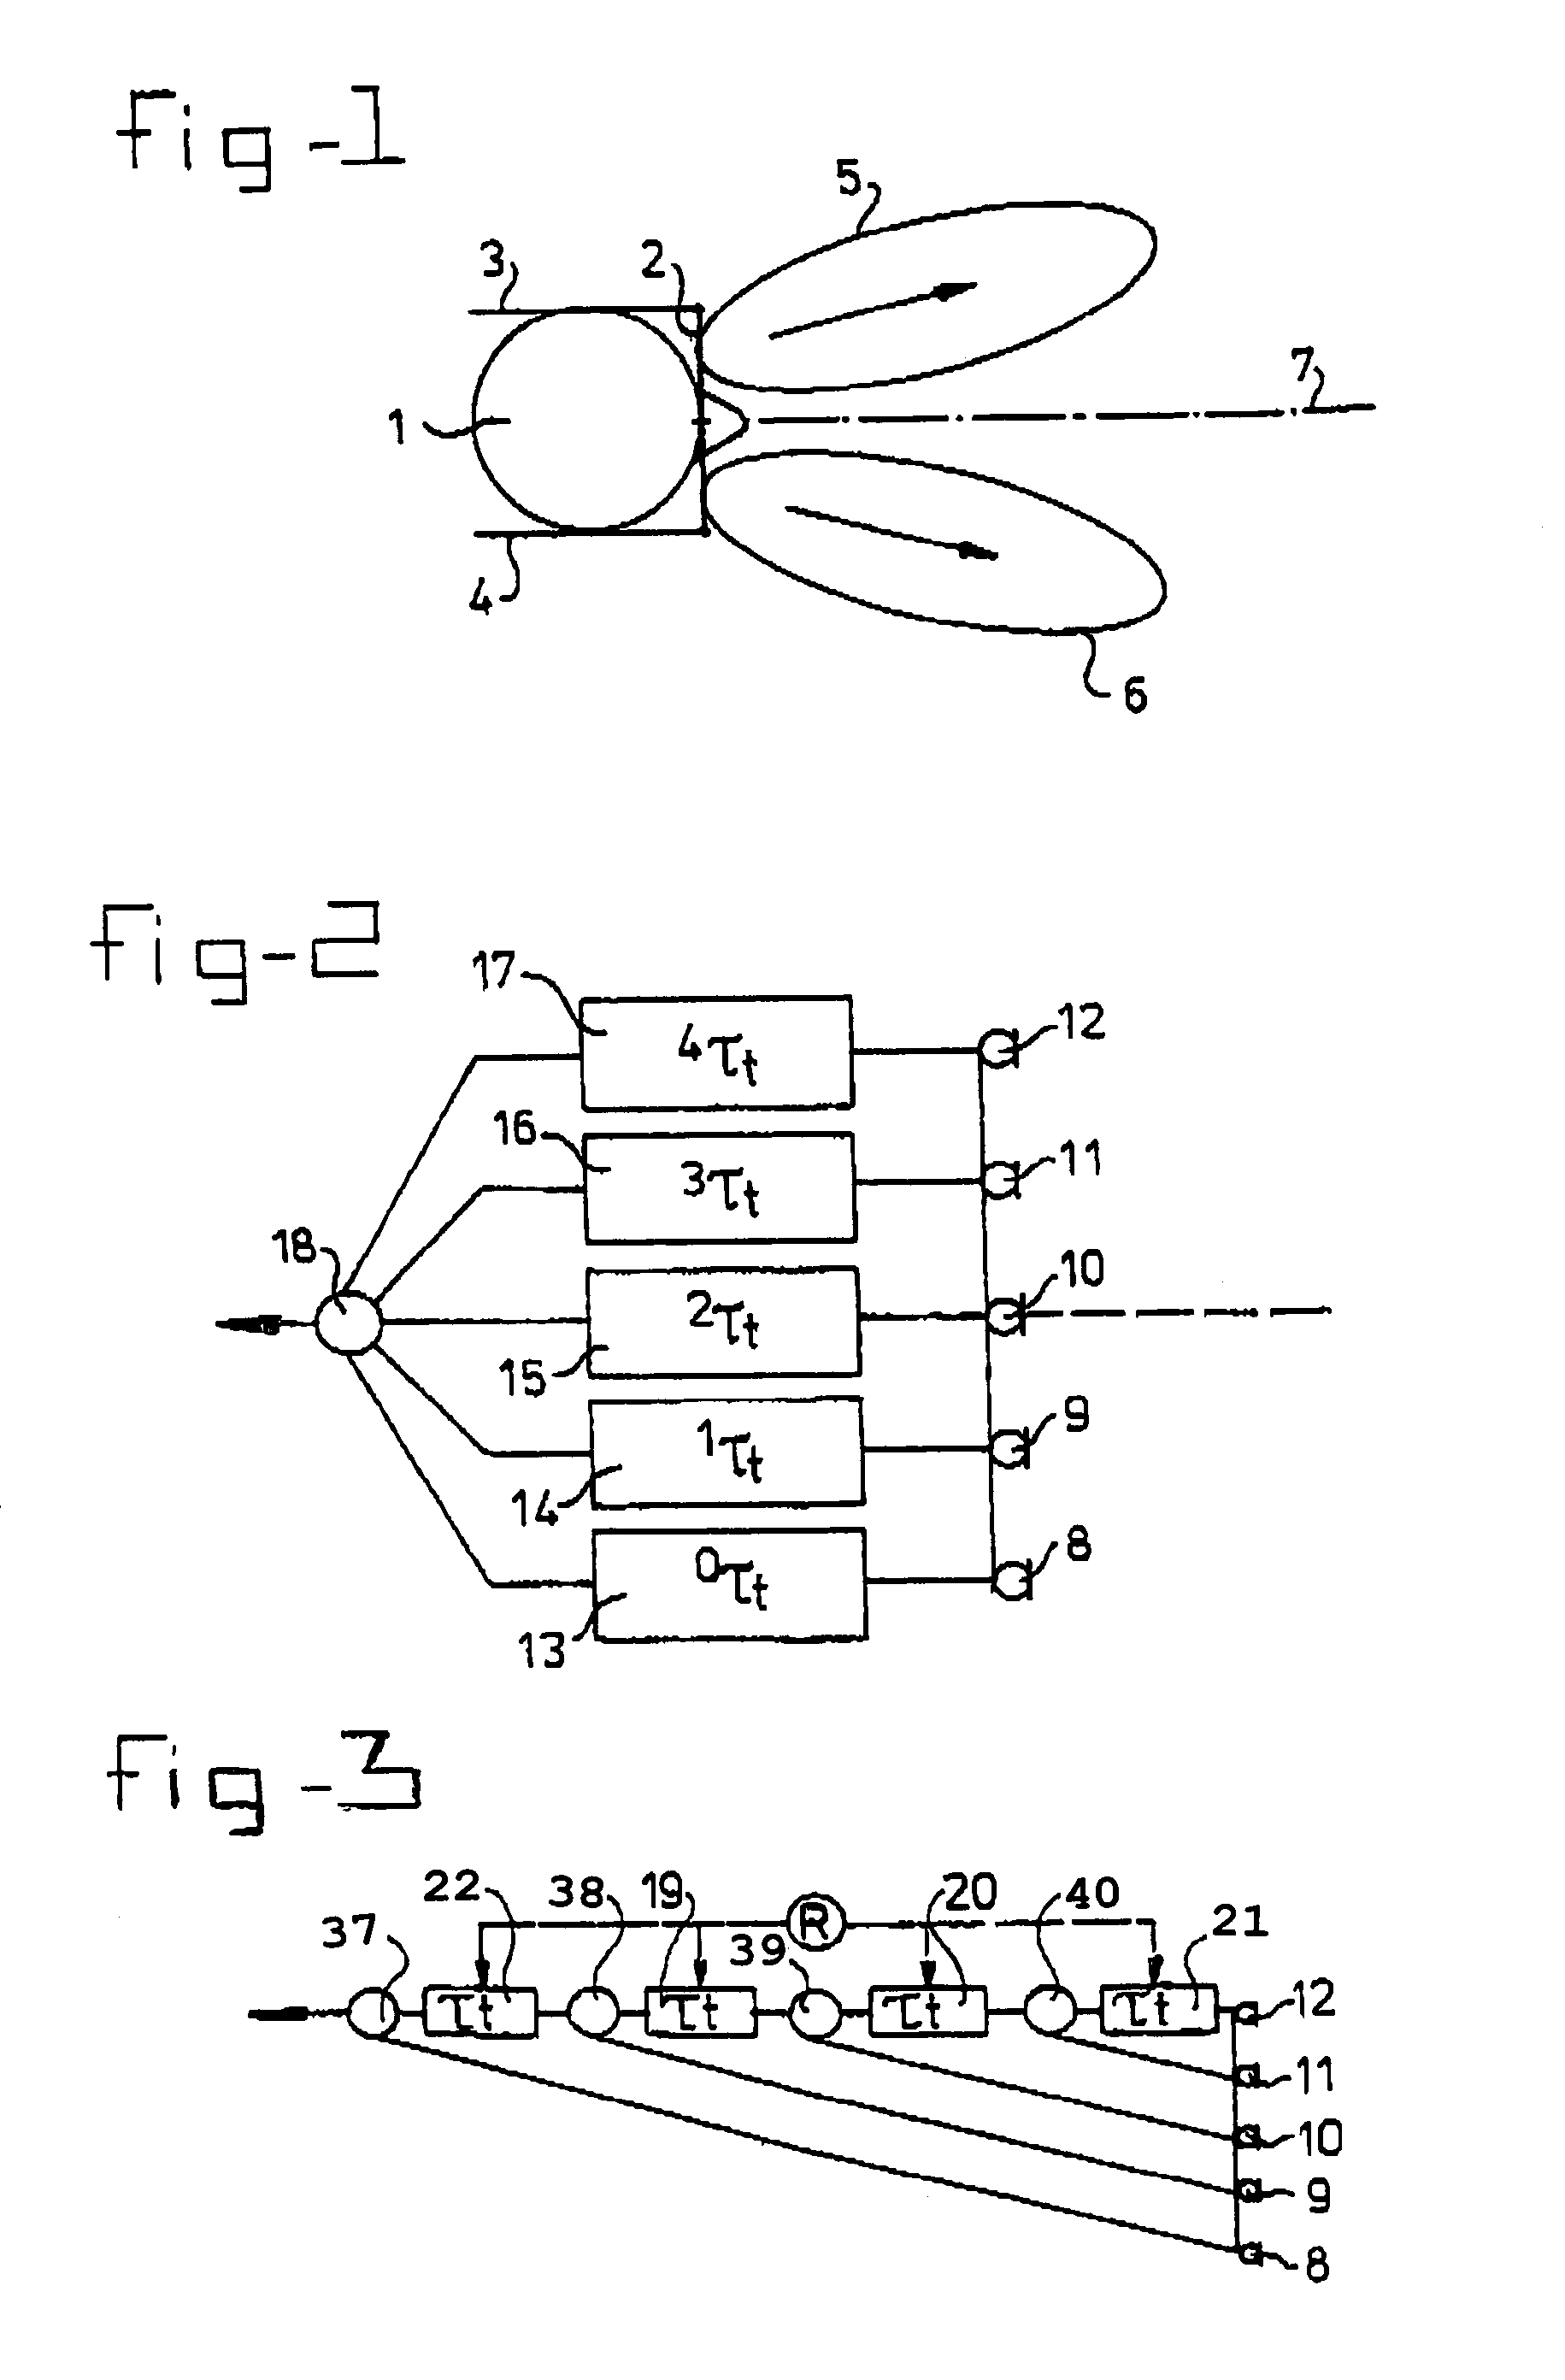 Hearing aid comprising an array of microphones